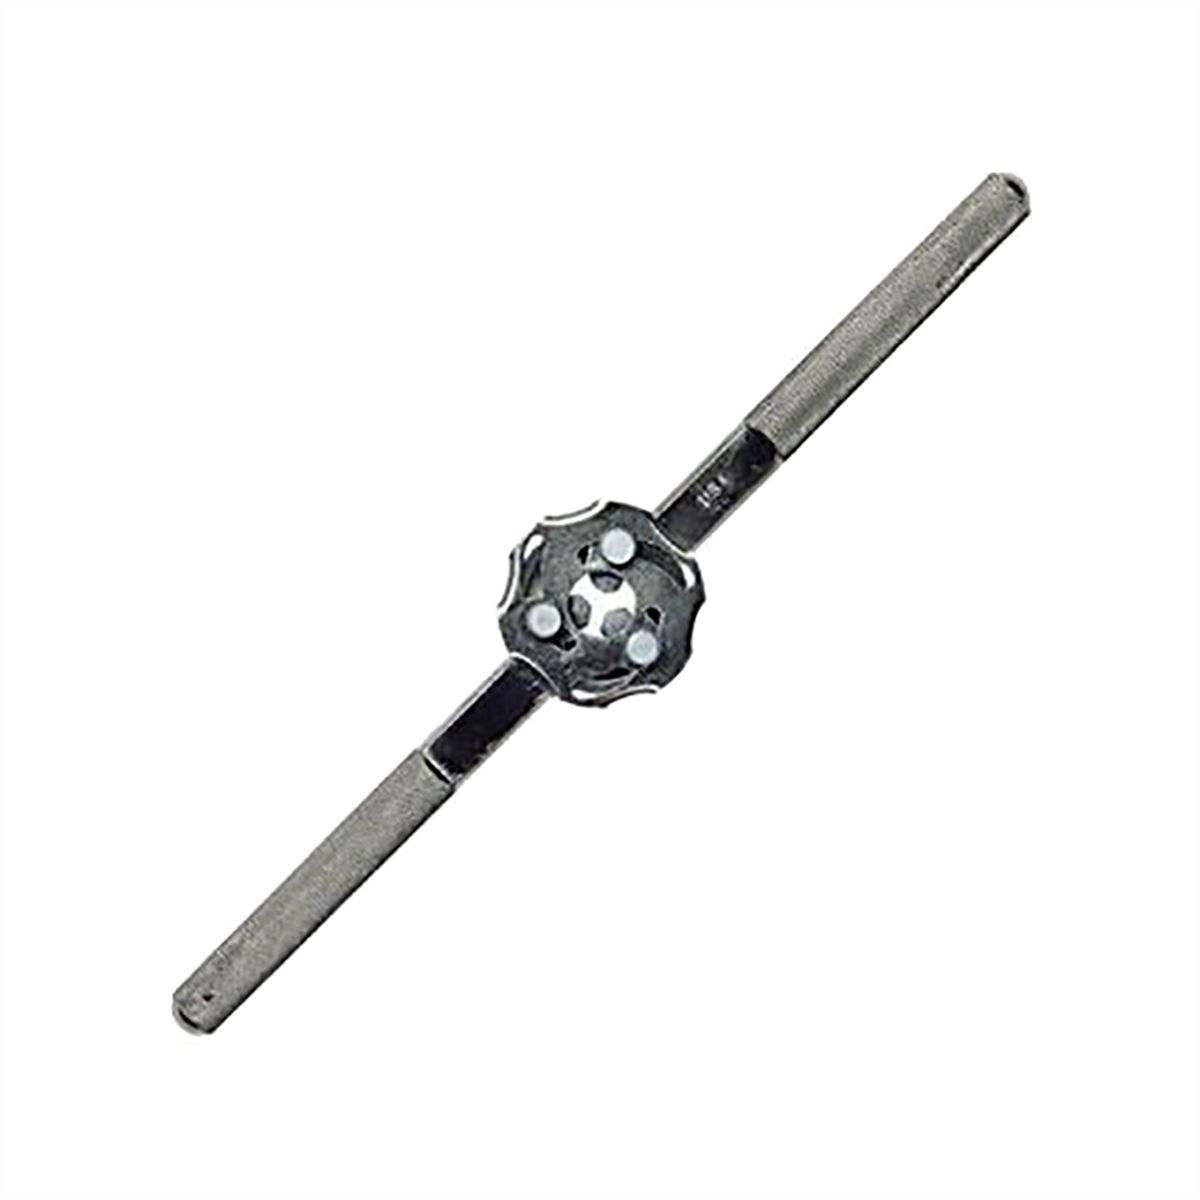 Adjustable Guide Die Stock - 1-1/2 In Round